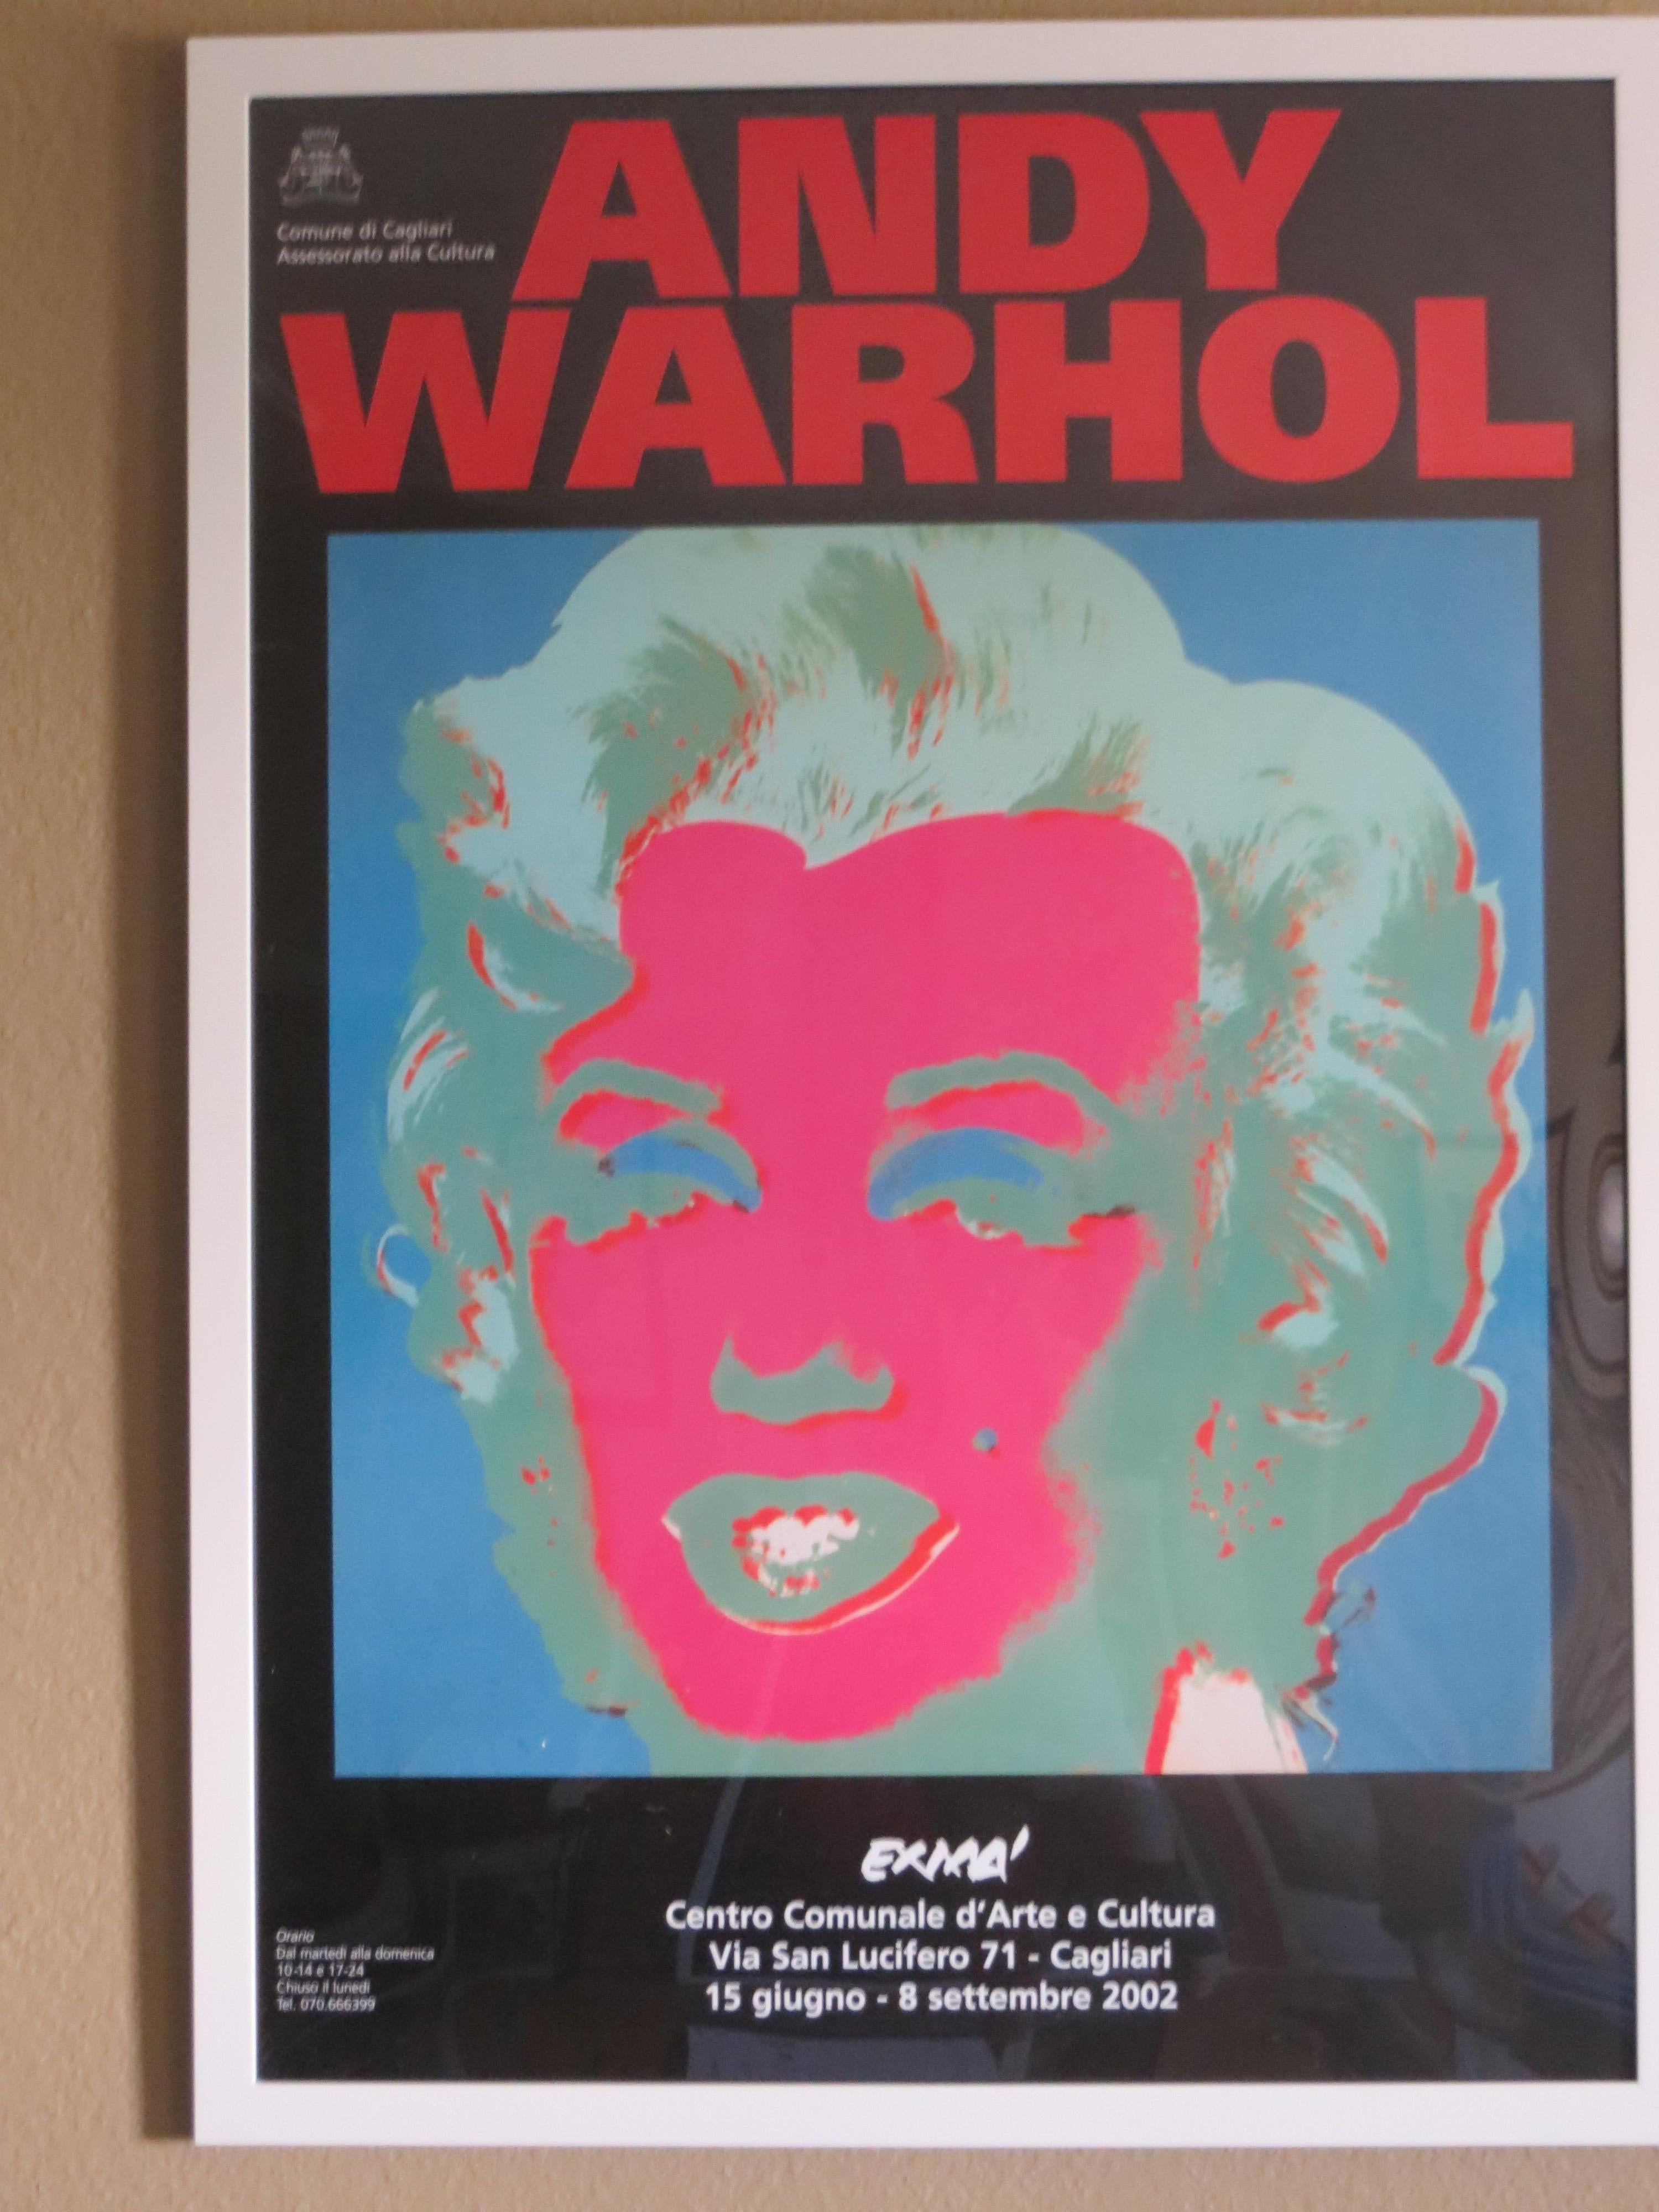 Andy Warhol Figurative Photograph -  Rare Original Print Exhibition Poster by Andy WarhoLExma Marilyn